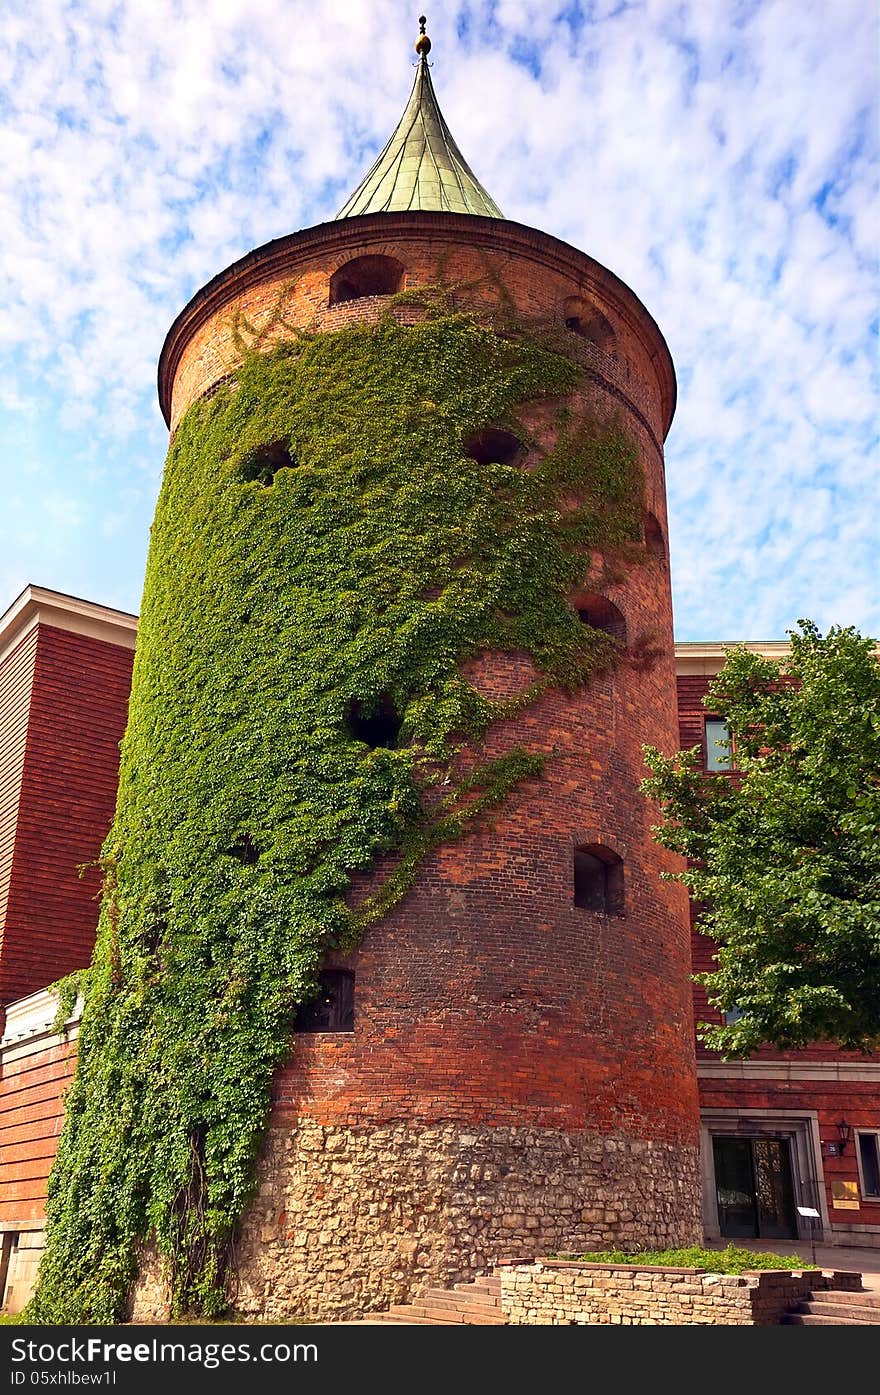 Antique powder tower of red brick green entwined with ivy